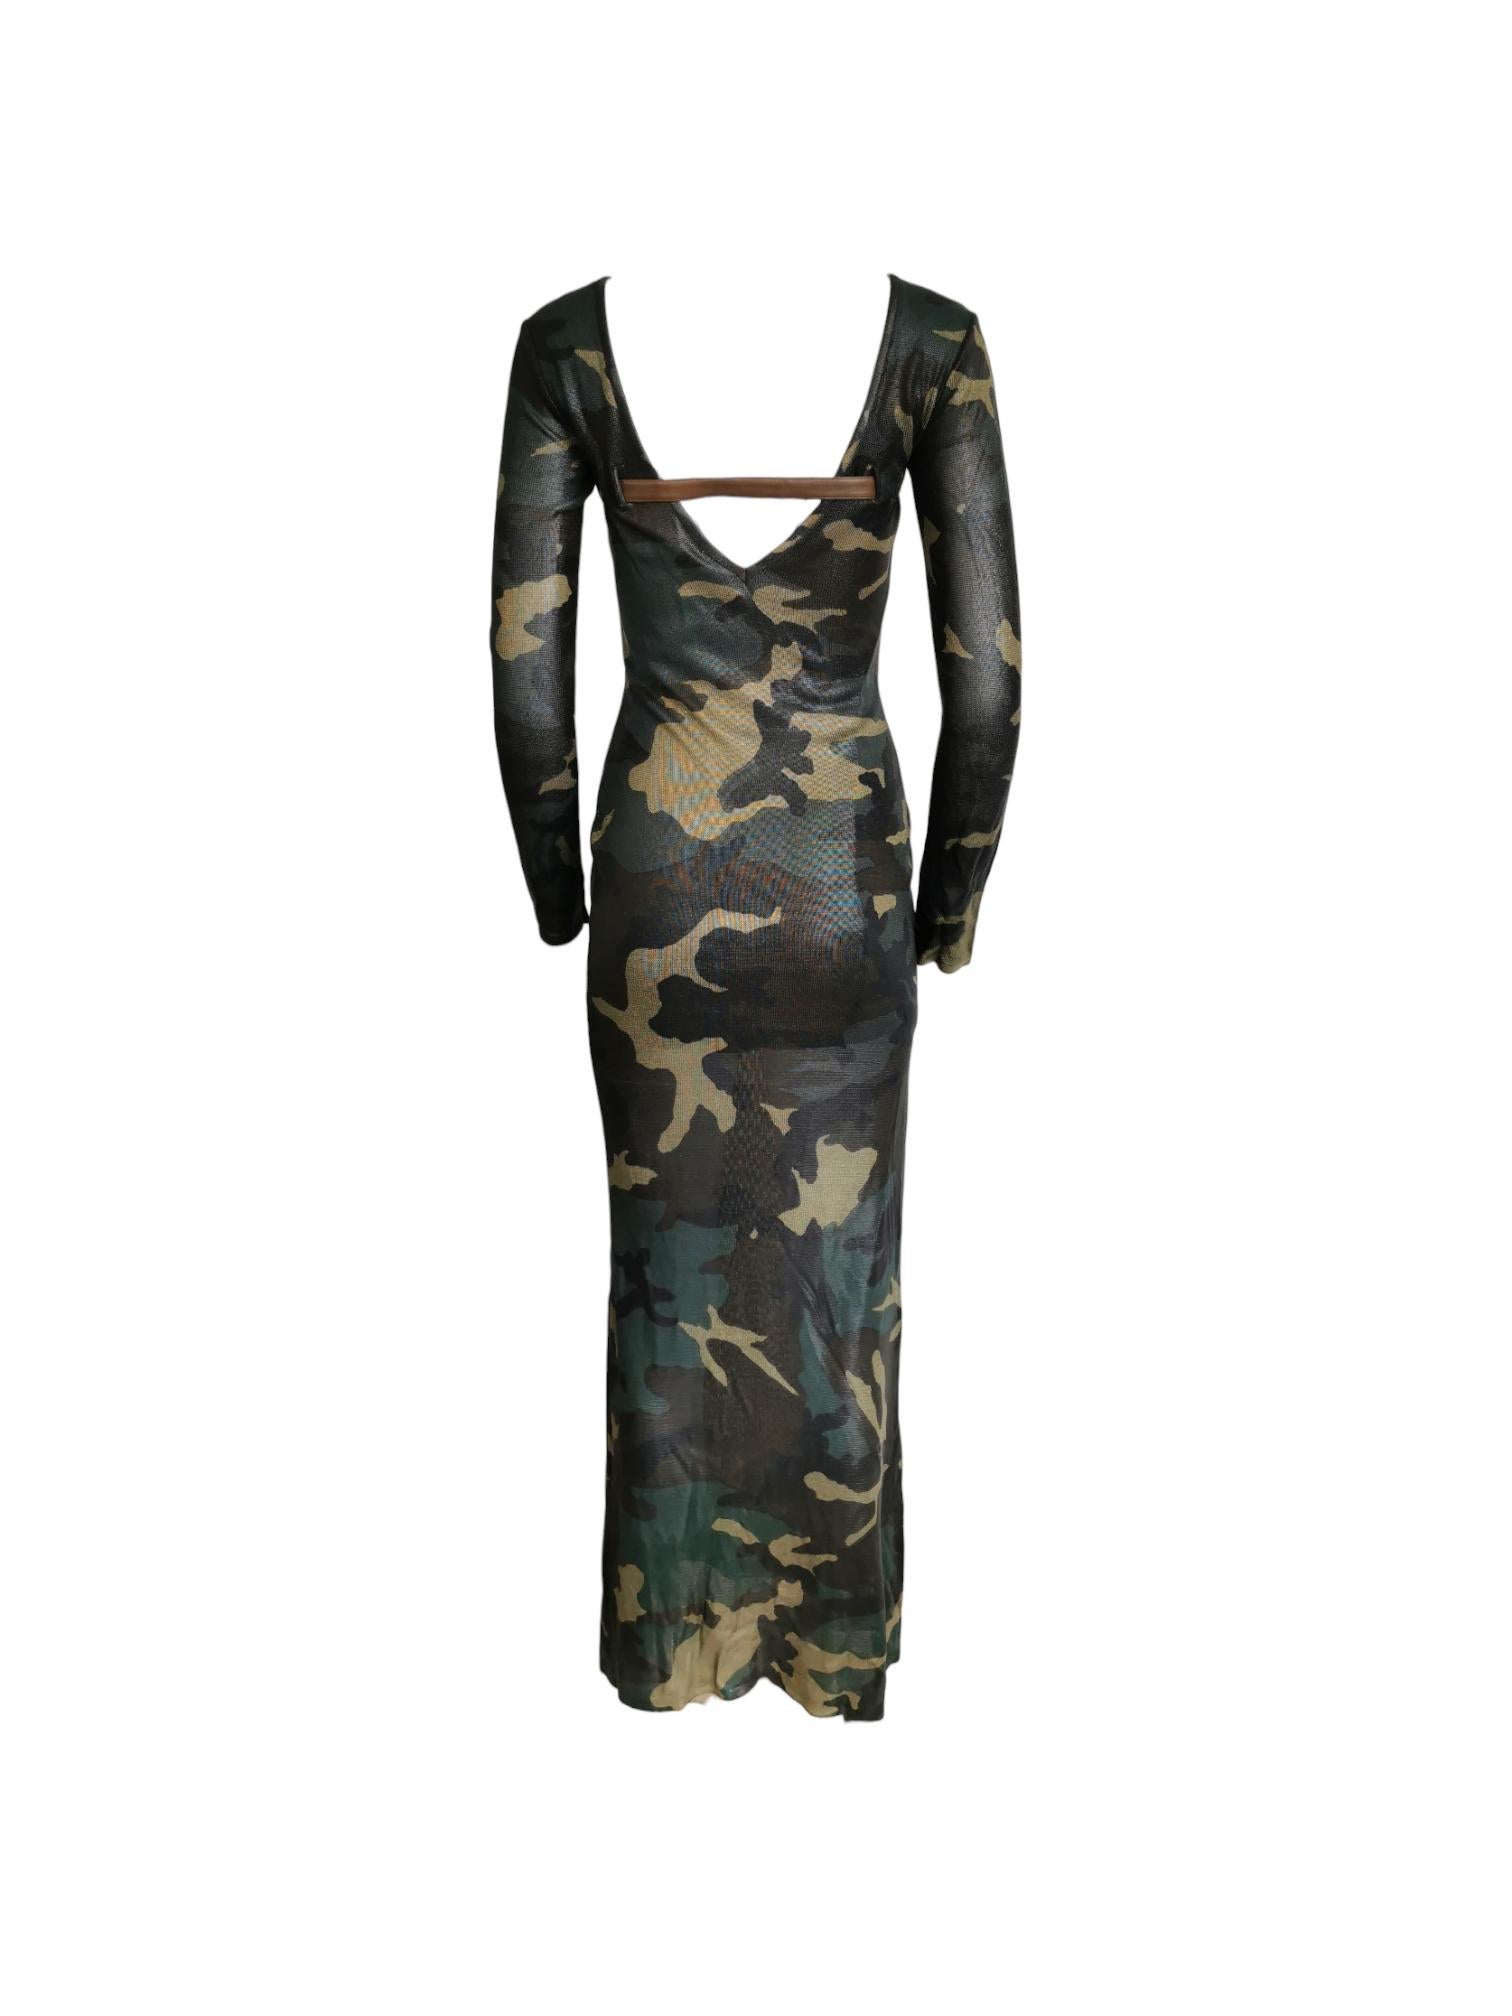 Christian Dior by John Galliano Camouflage dress, a daring but casual look. This dress features long sleeves, a deep V neckline, perfectly complemented by high splits on each side, adding a touch of spice. The captivating camouflage pattern, adorned